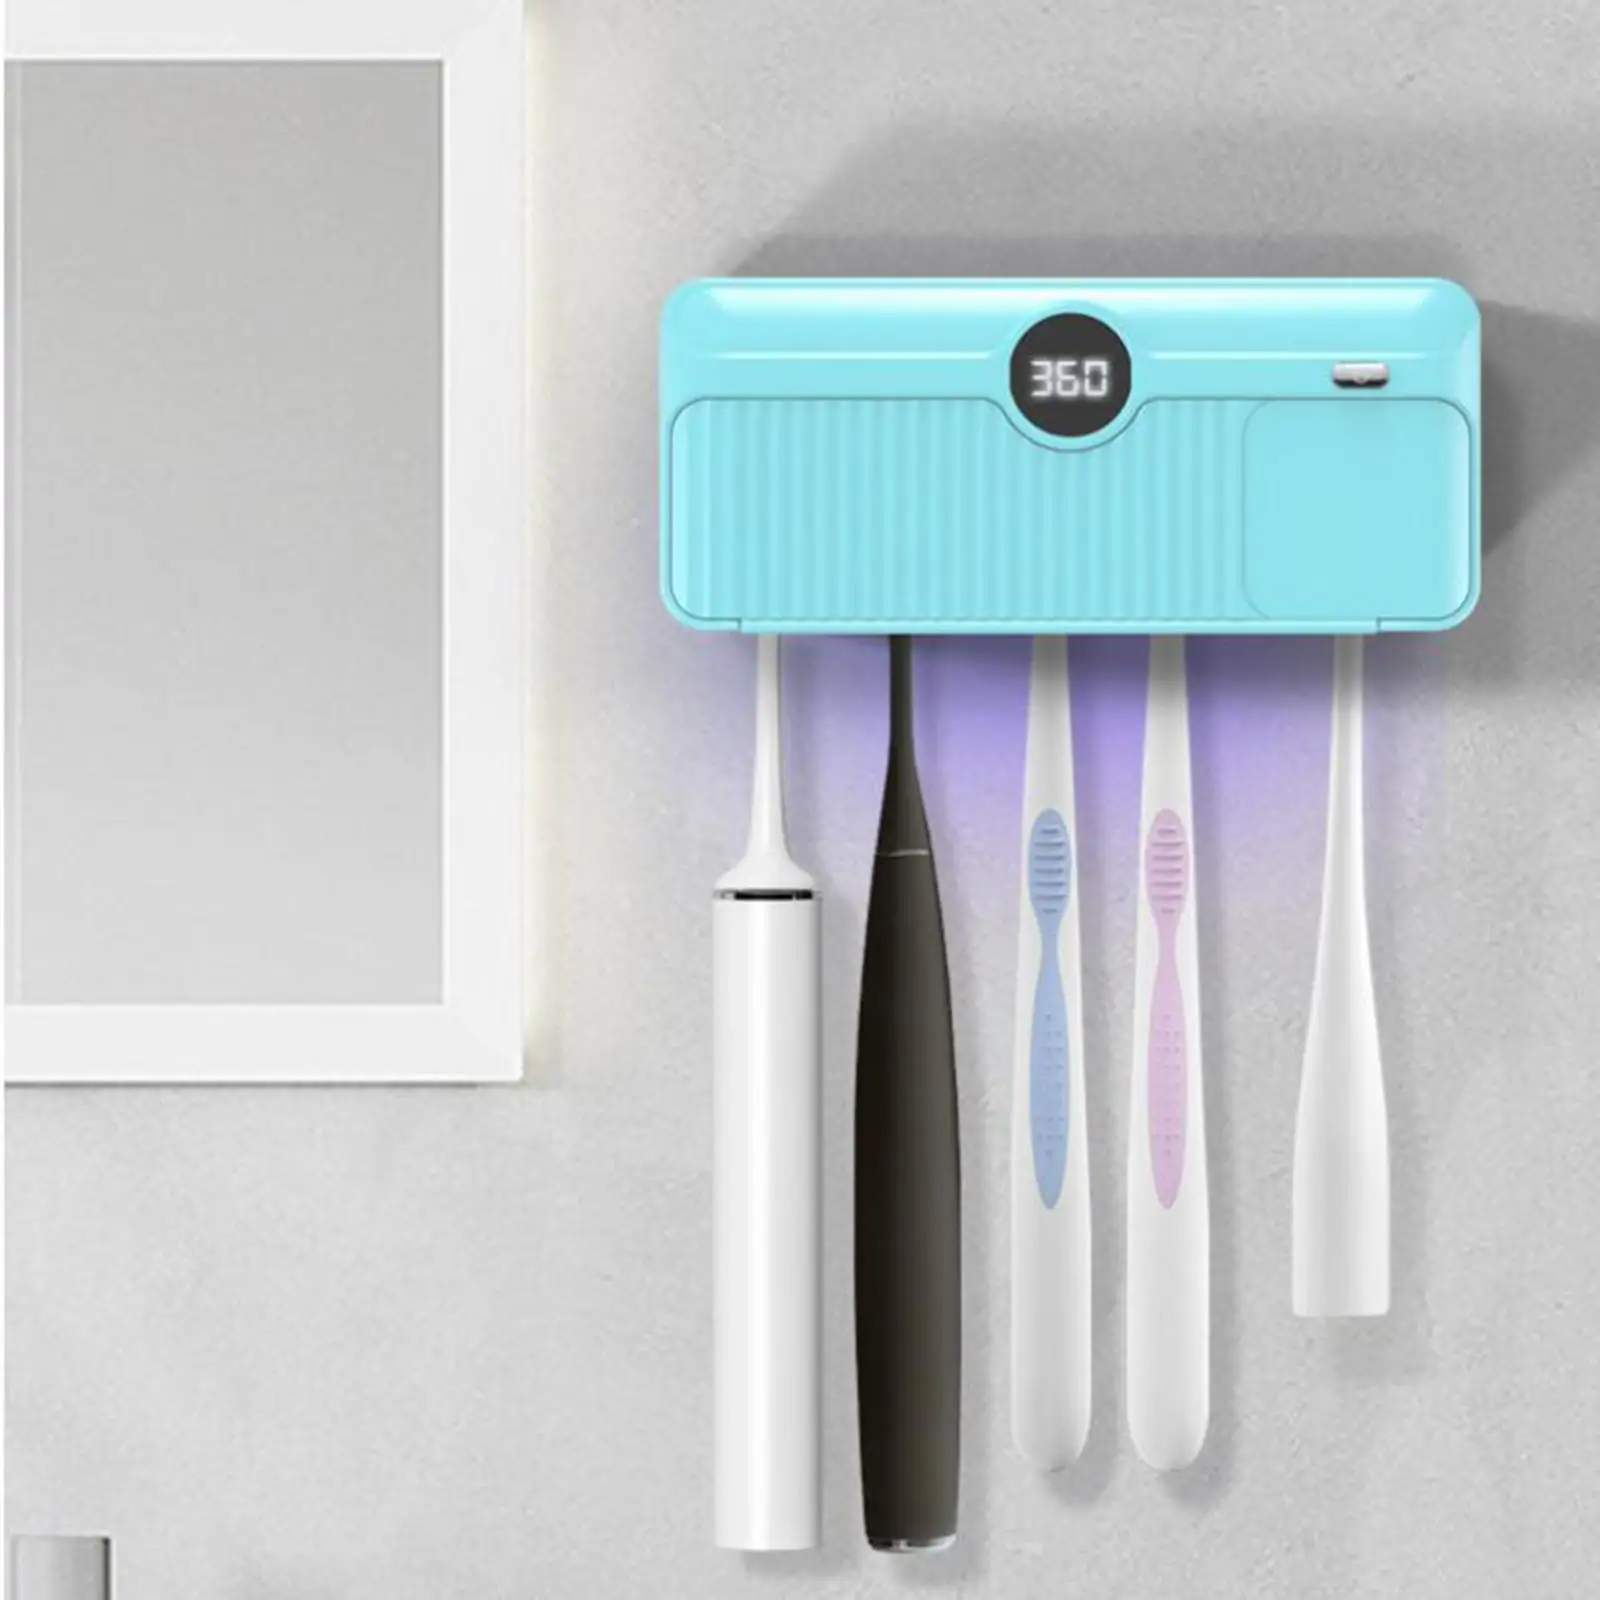 Toothbrush Sterilizer Drilling-Free Toothbrush Holder Toothpaste Organizer for Family All Toothbrushes